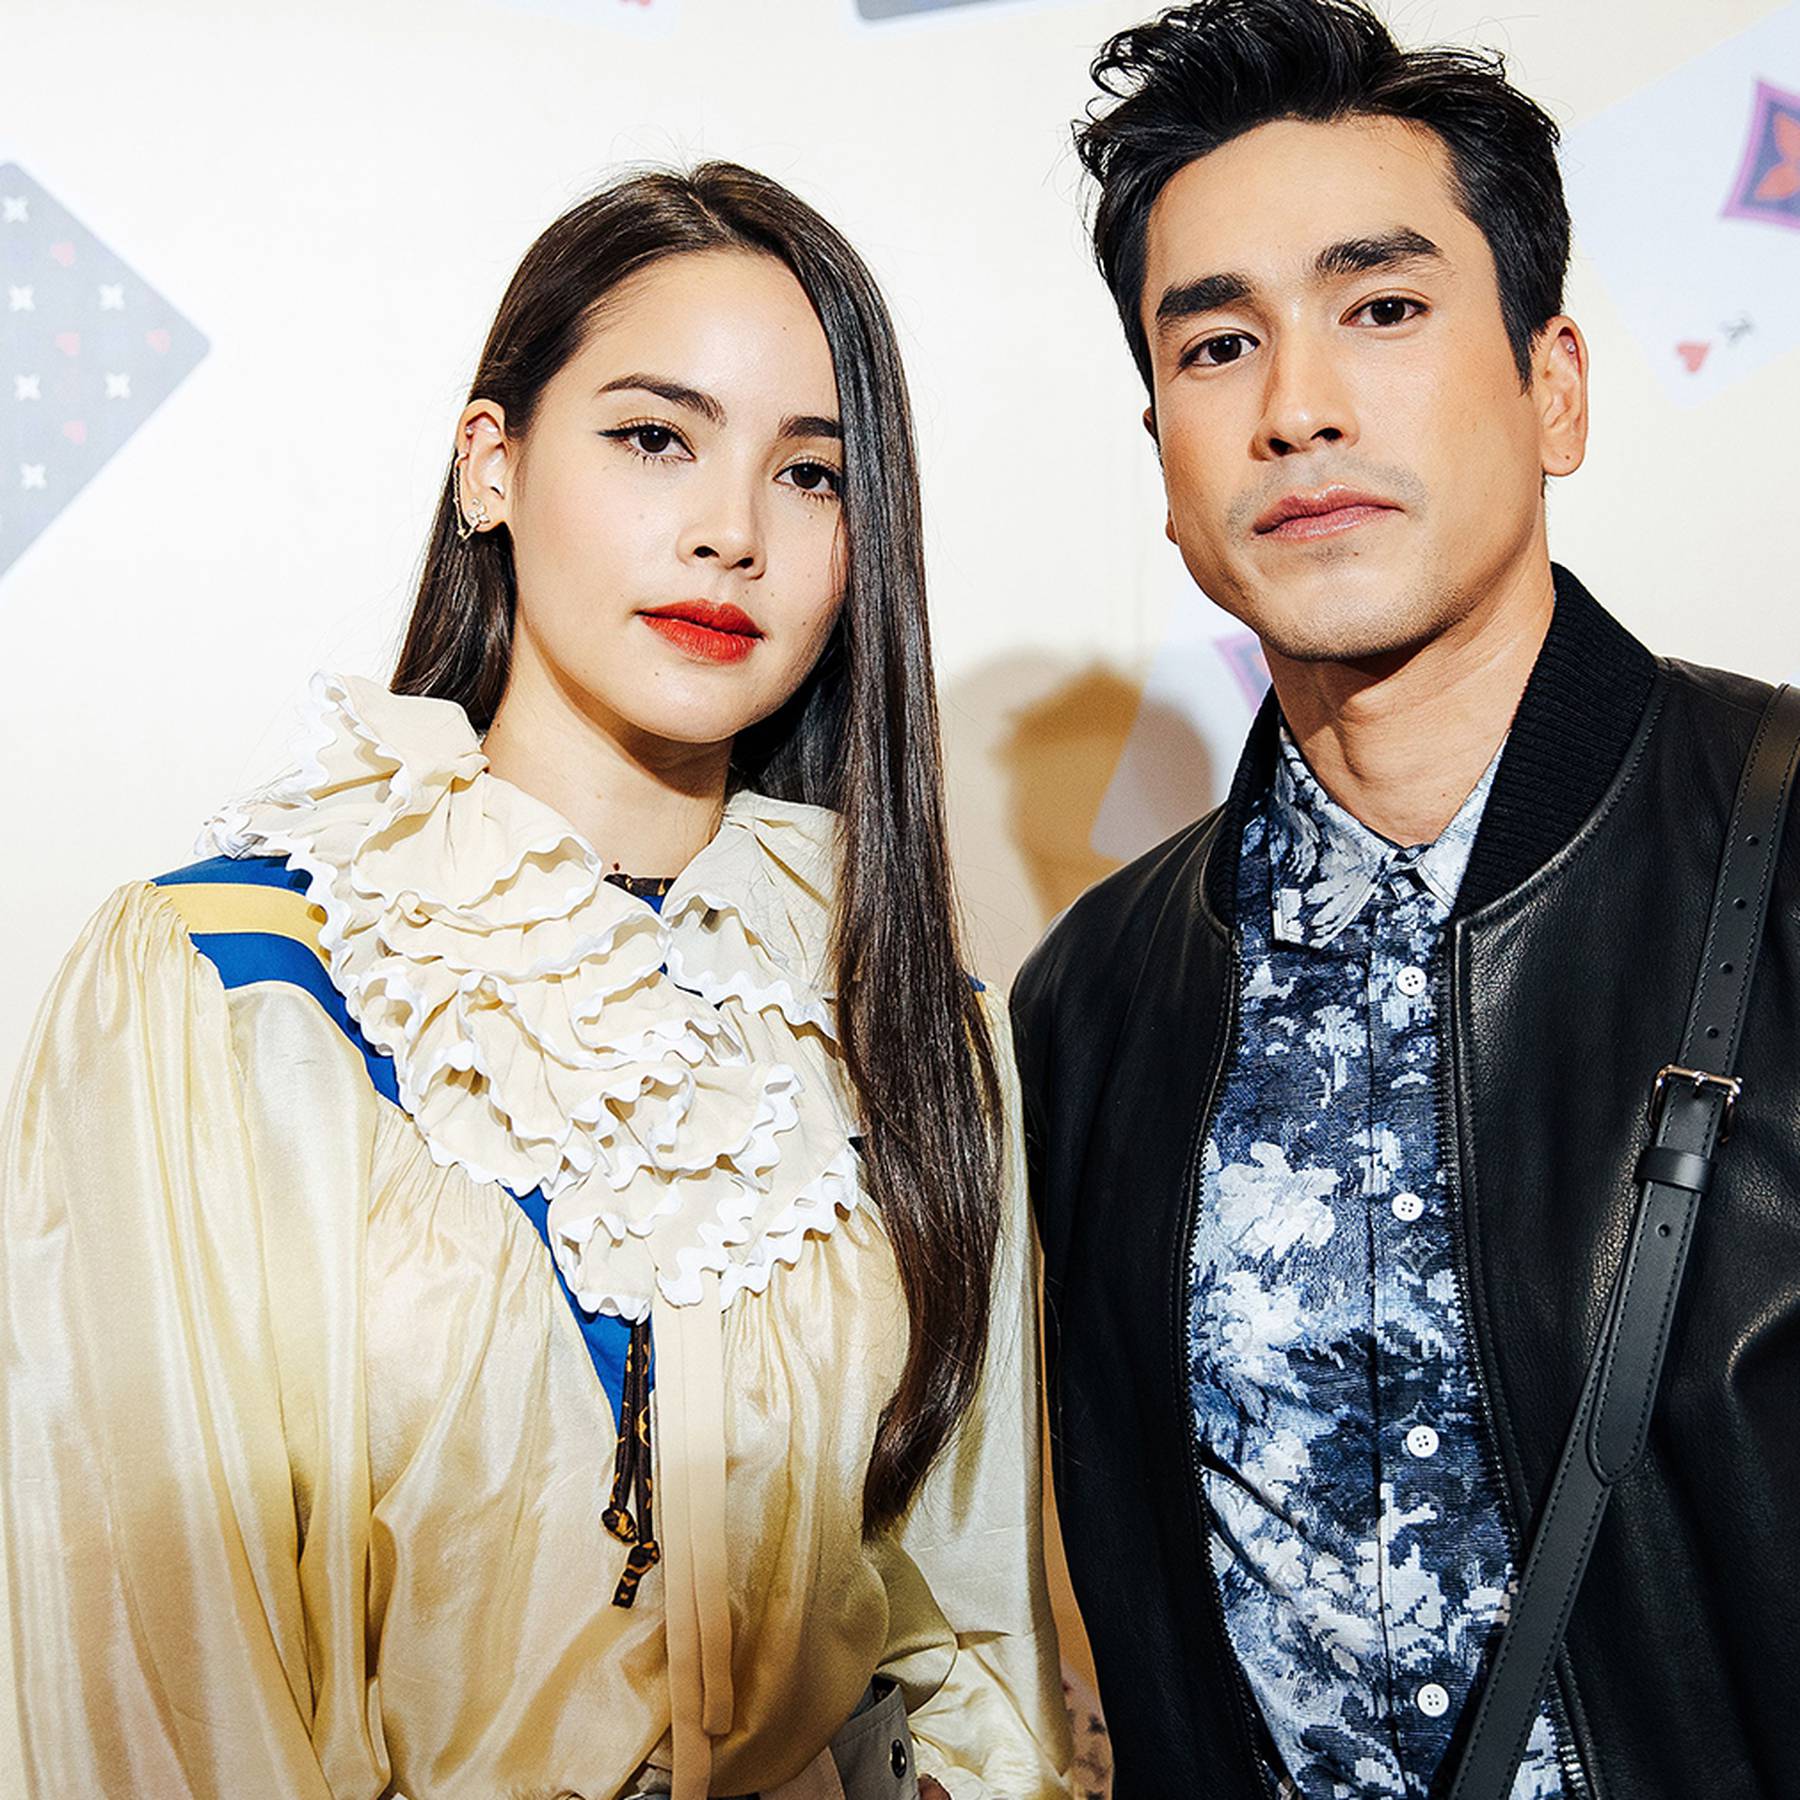 The rise of Asian brand ambassadors: Why luxury brands are looking